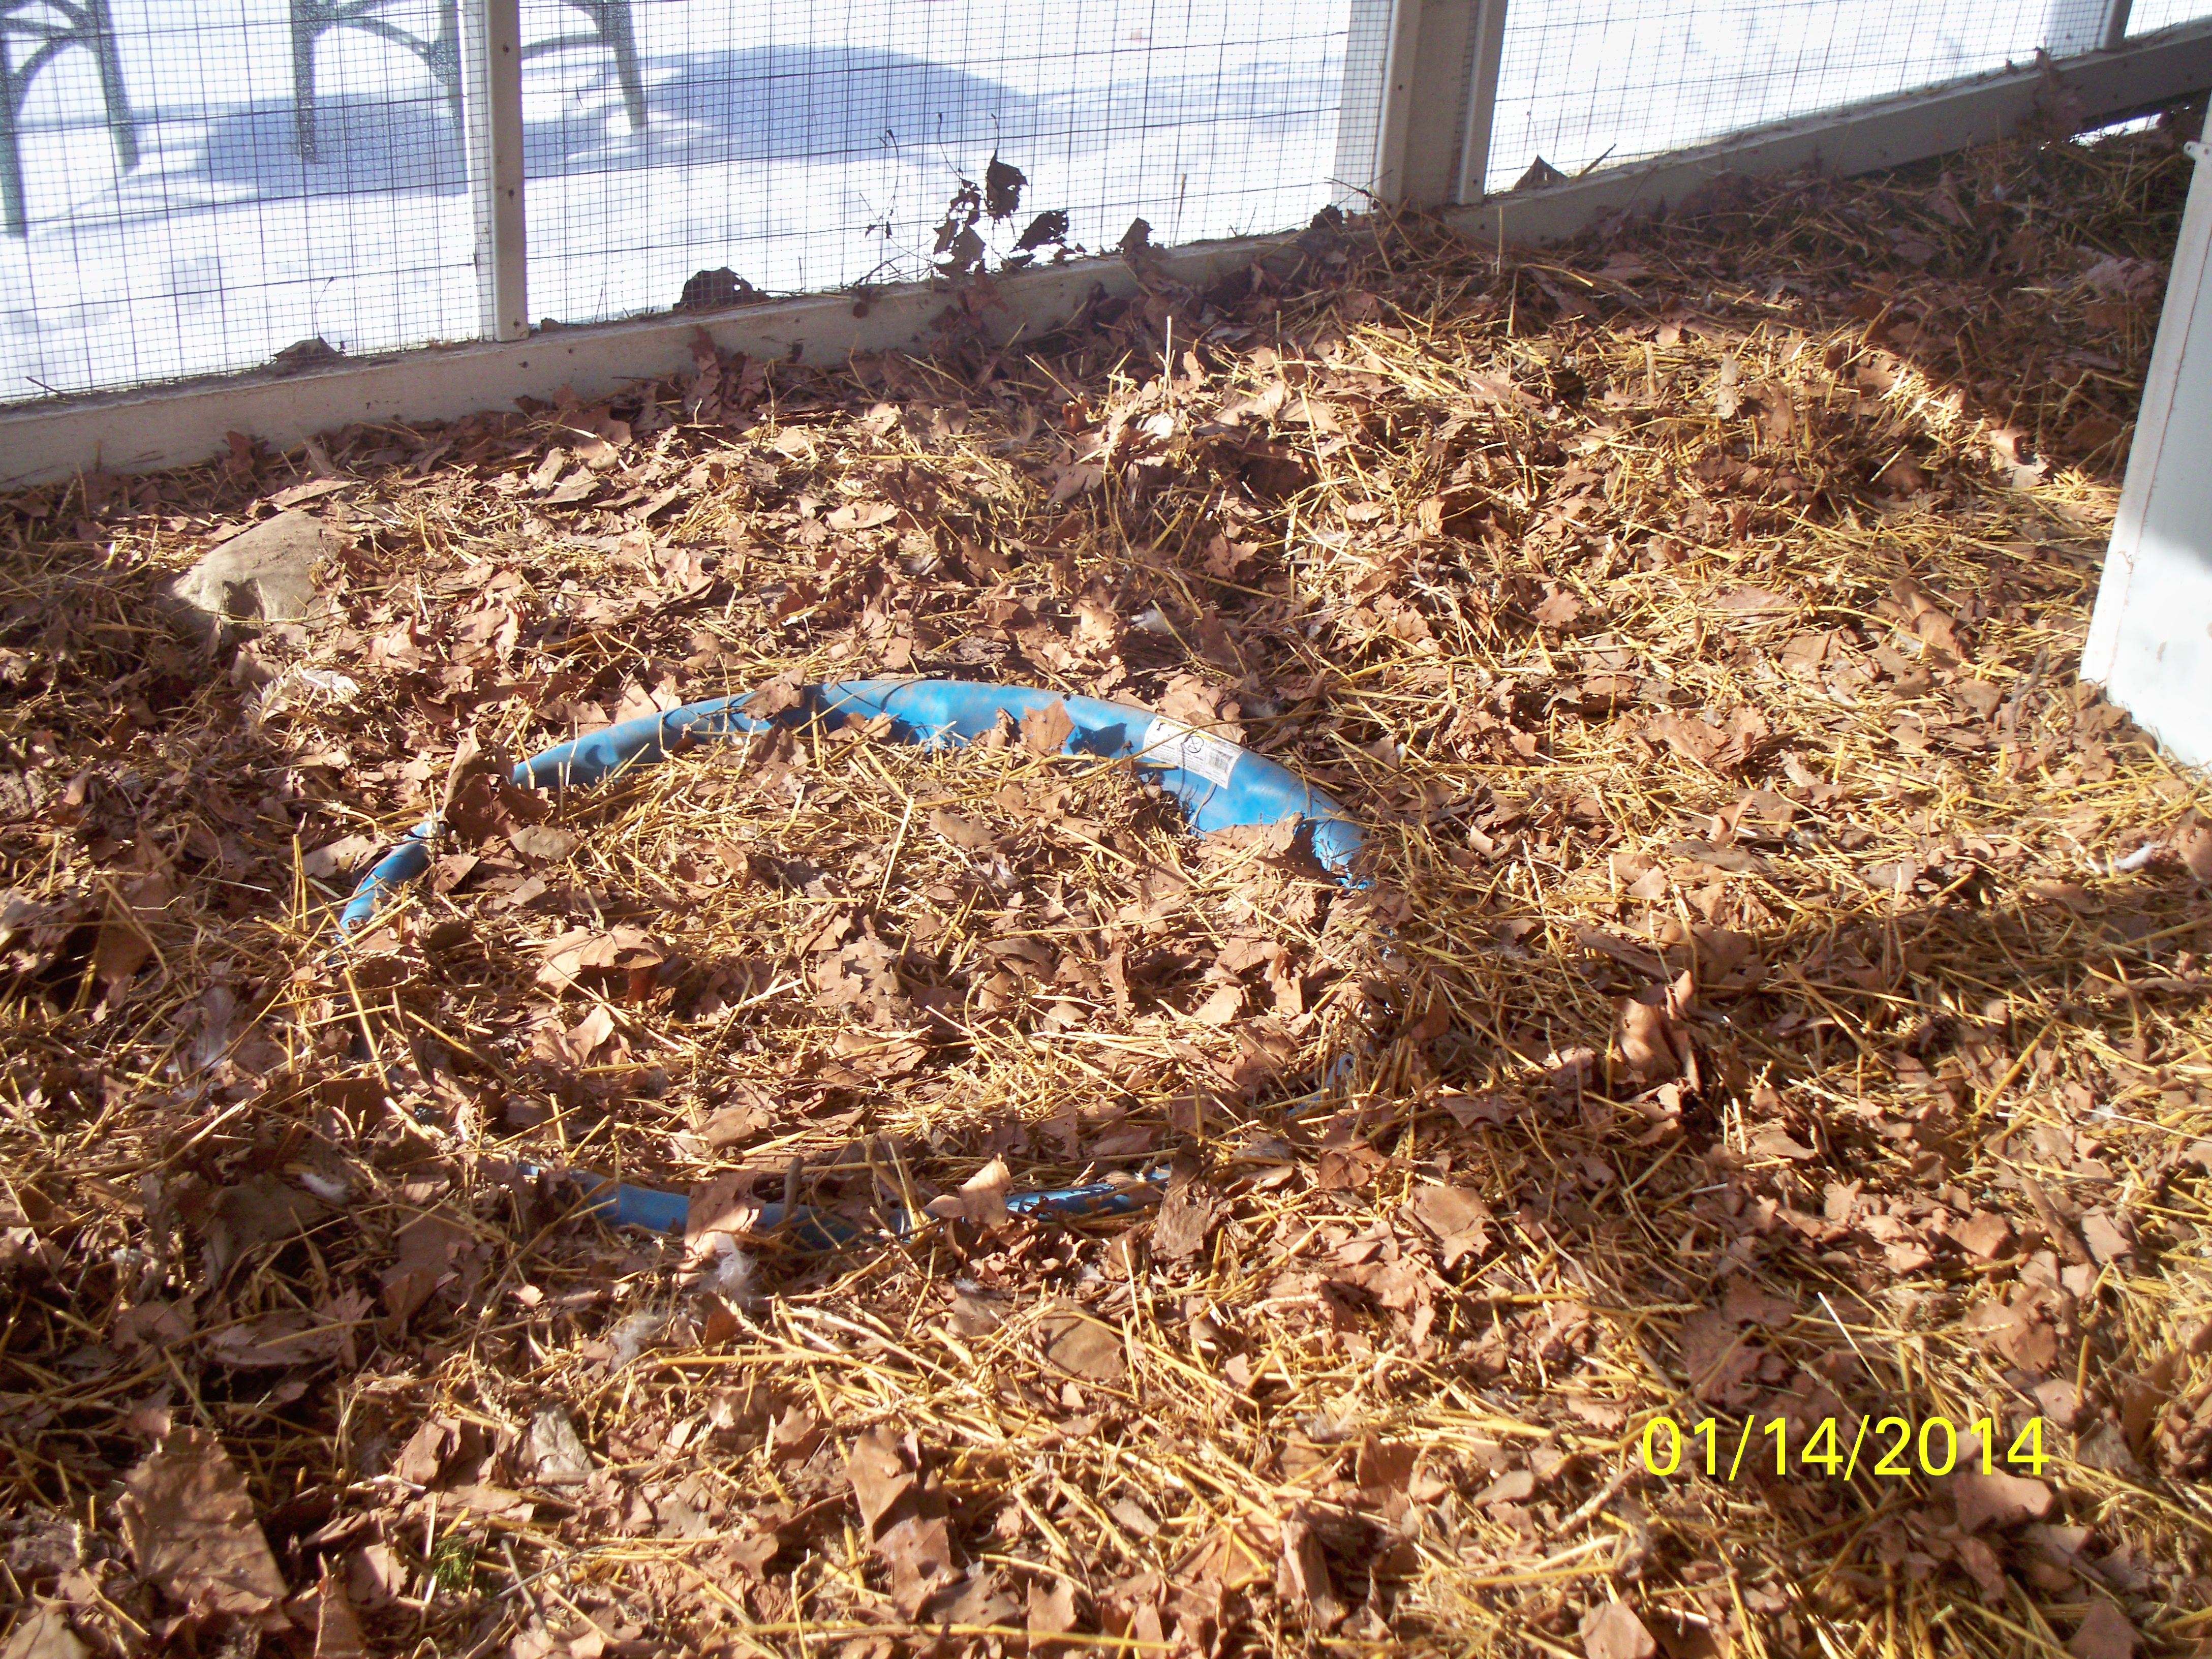 The blue circle sticking up is their dust bath. At the bottom of it any way. I put big bags of dried leaves and some straw in. about once a week I rake it back up to the other sections and it they love digging it all over again. Under all those leaves and straw they have also dug out a few of their own dust bowls.